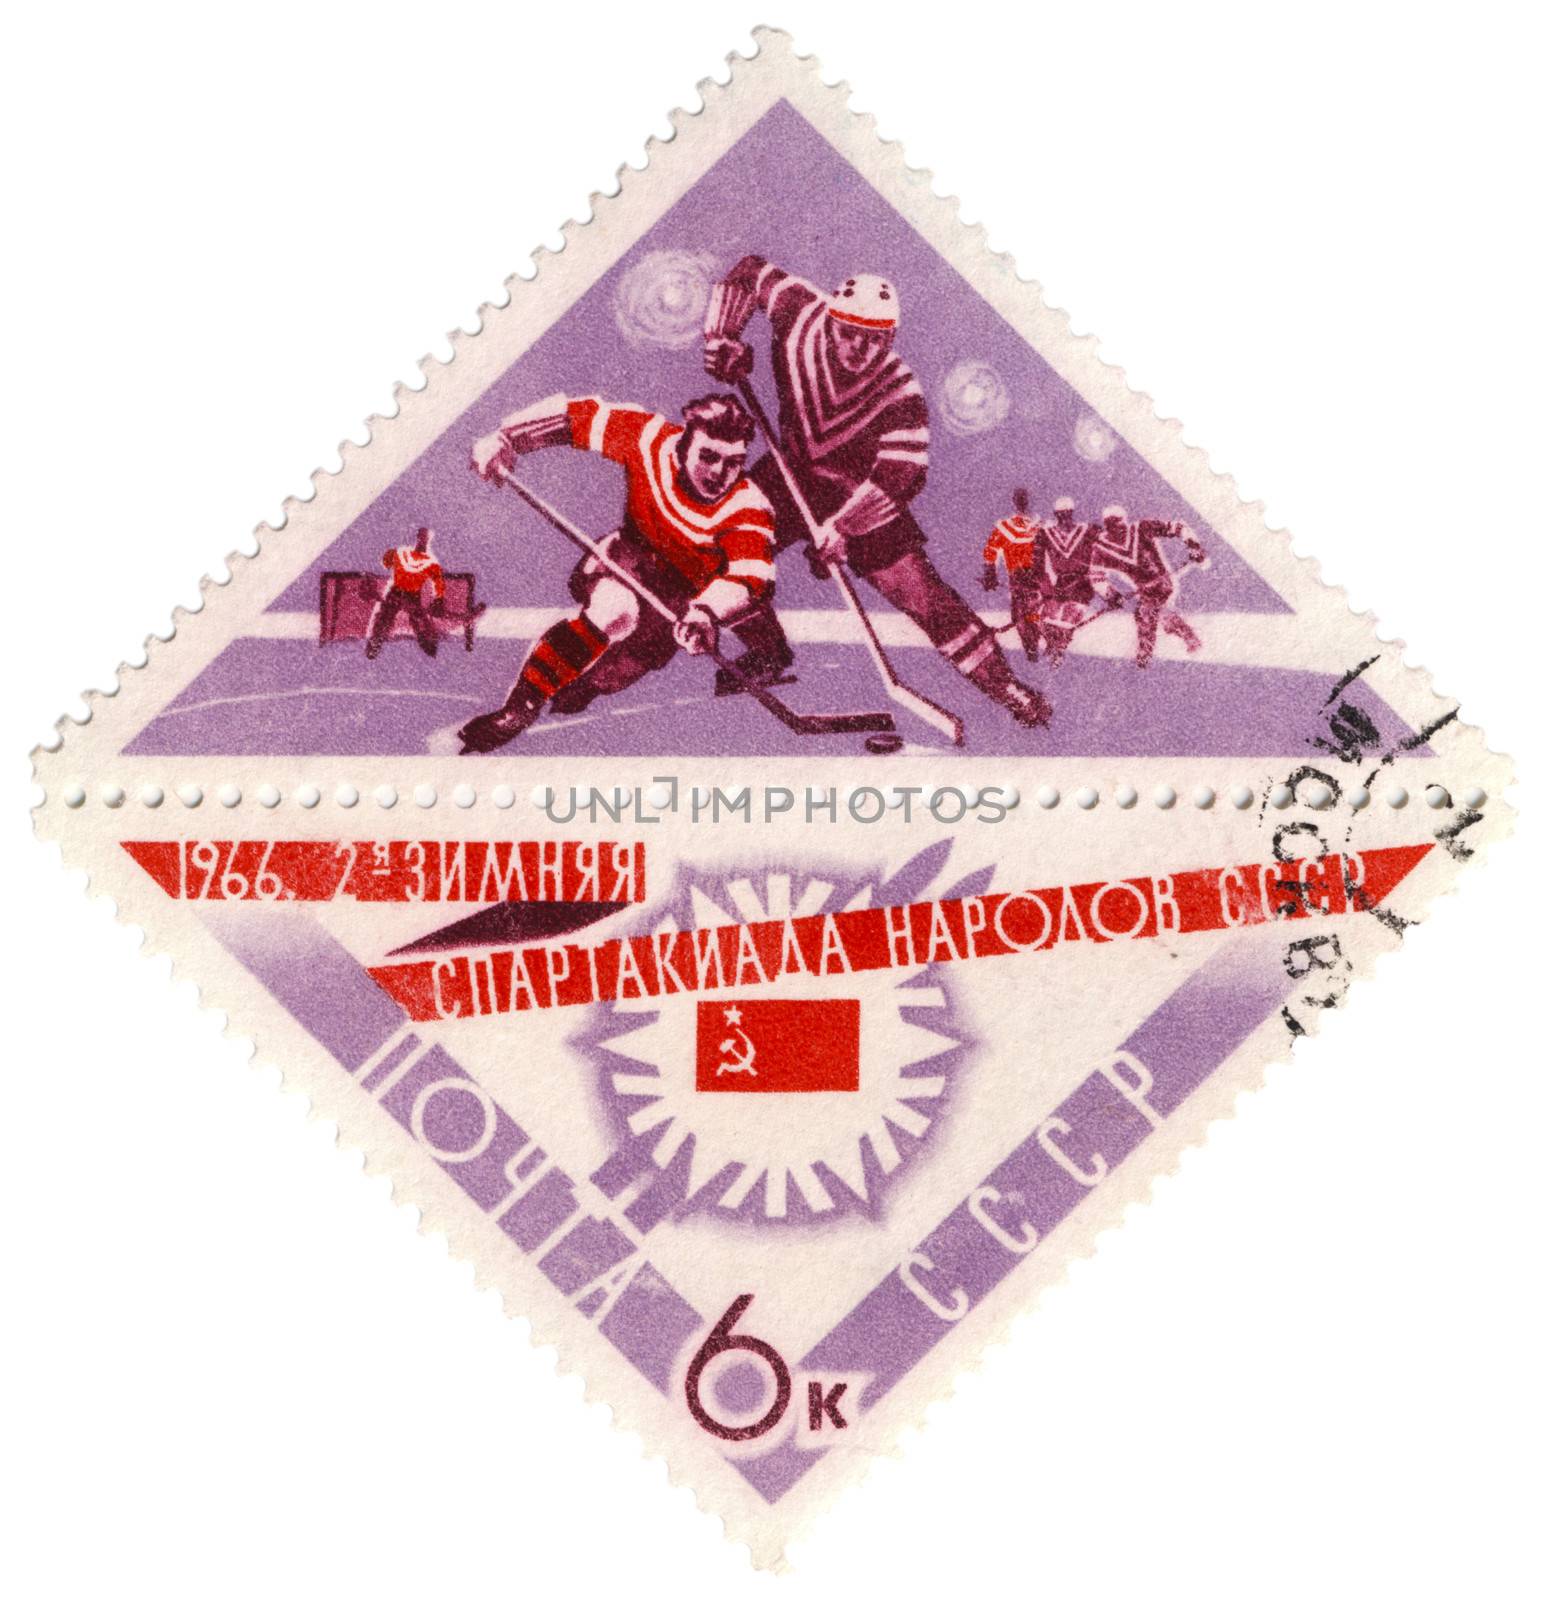 Ice hockey on post stamp by wander